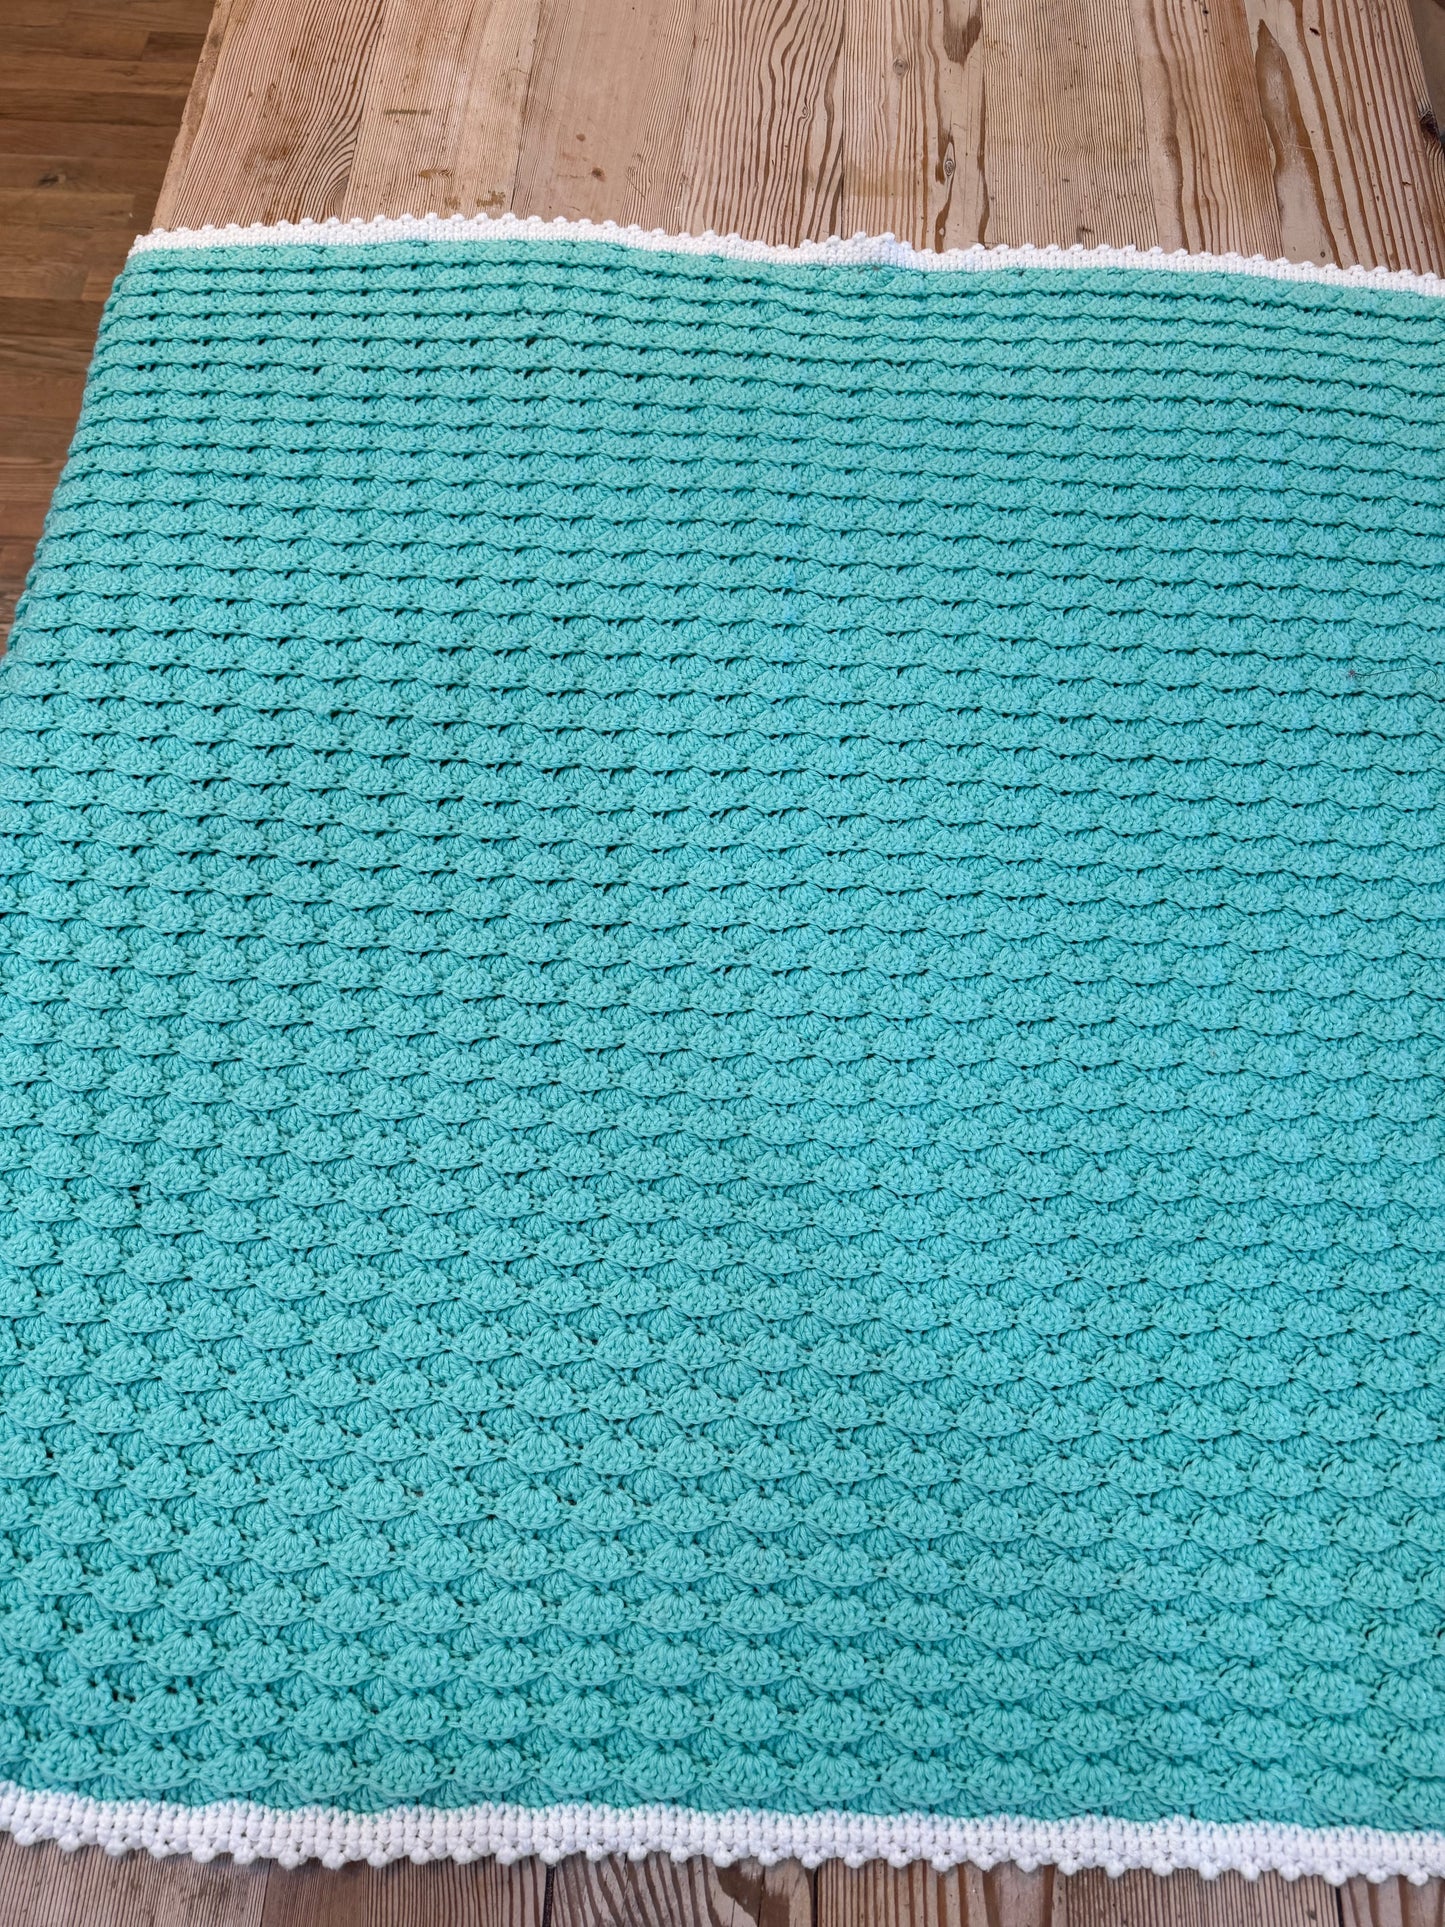 Turquoise & White Afghan 45x45”